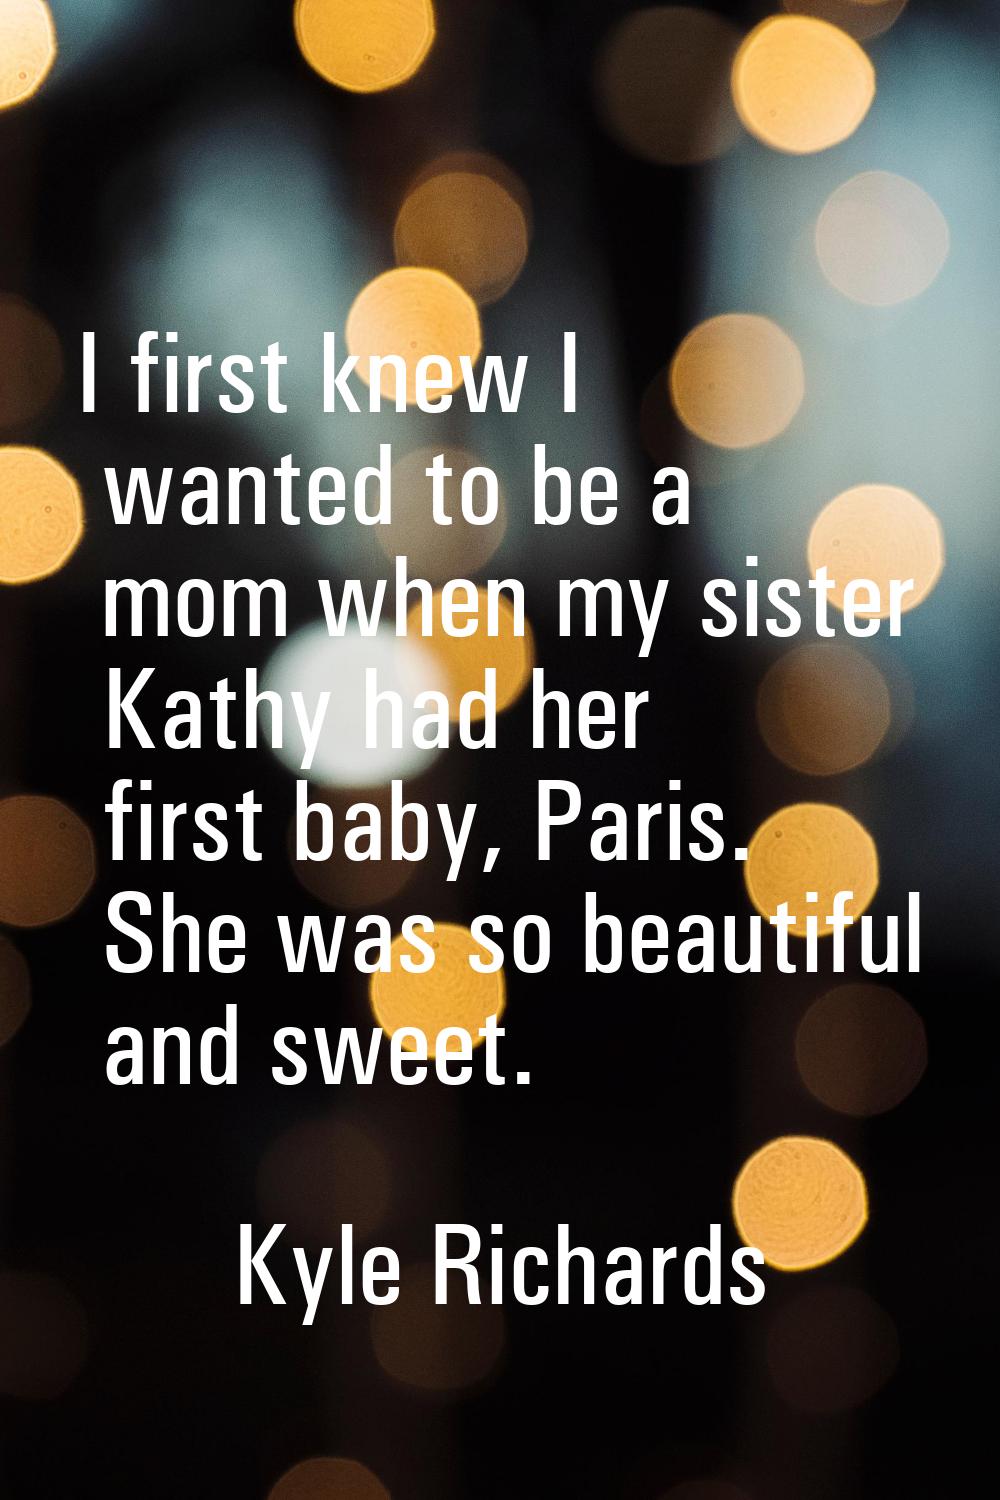 I first knew I wanted to be a mom when my sister Kathy had her first baby, Paris. She was so beauti